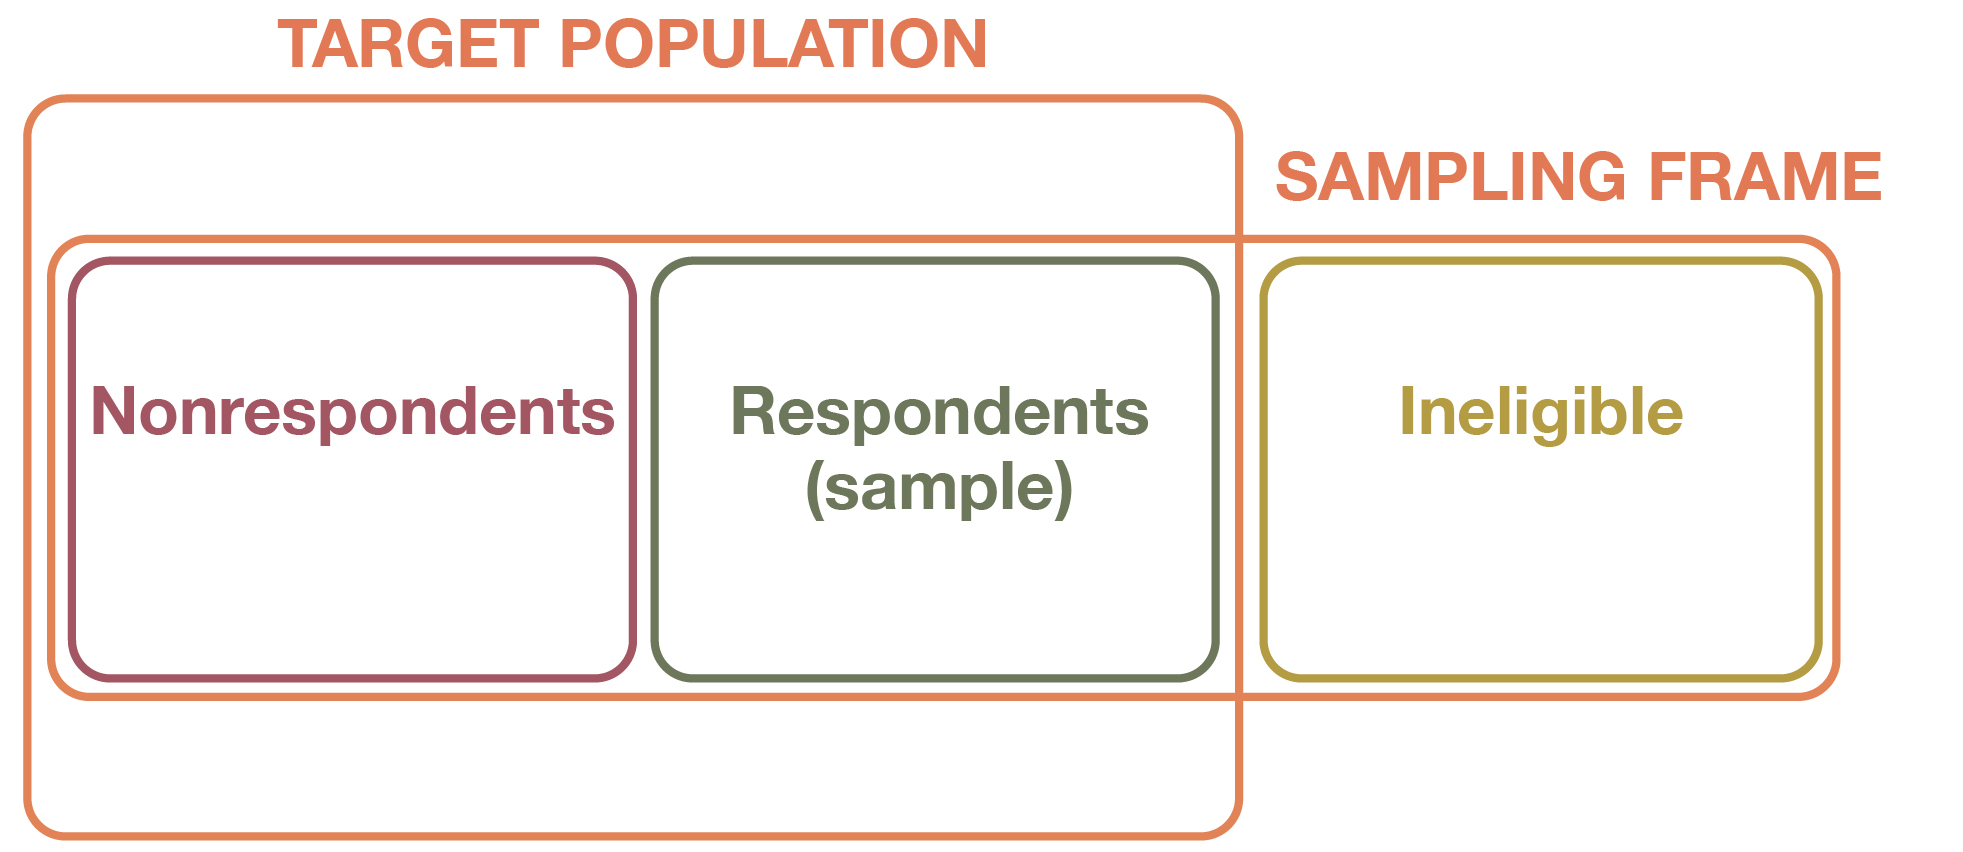 Diagram that features a box for the target population, within which is a box for the sampling frame—the part inside the population box being the sampled population, and the box outside being the ineligible cases that should be excluded from selection during sampling. The sampled population is further divided into nonrespondents and respondents (the sample).